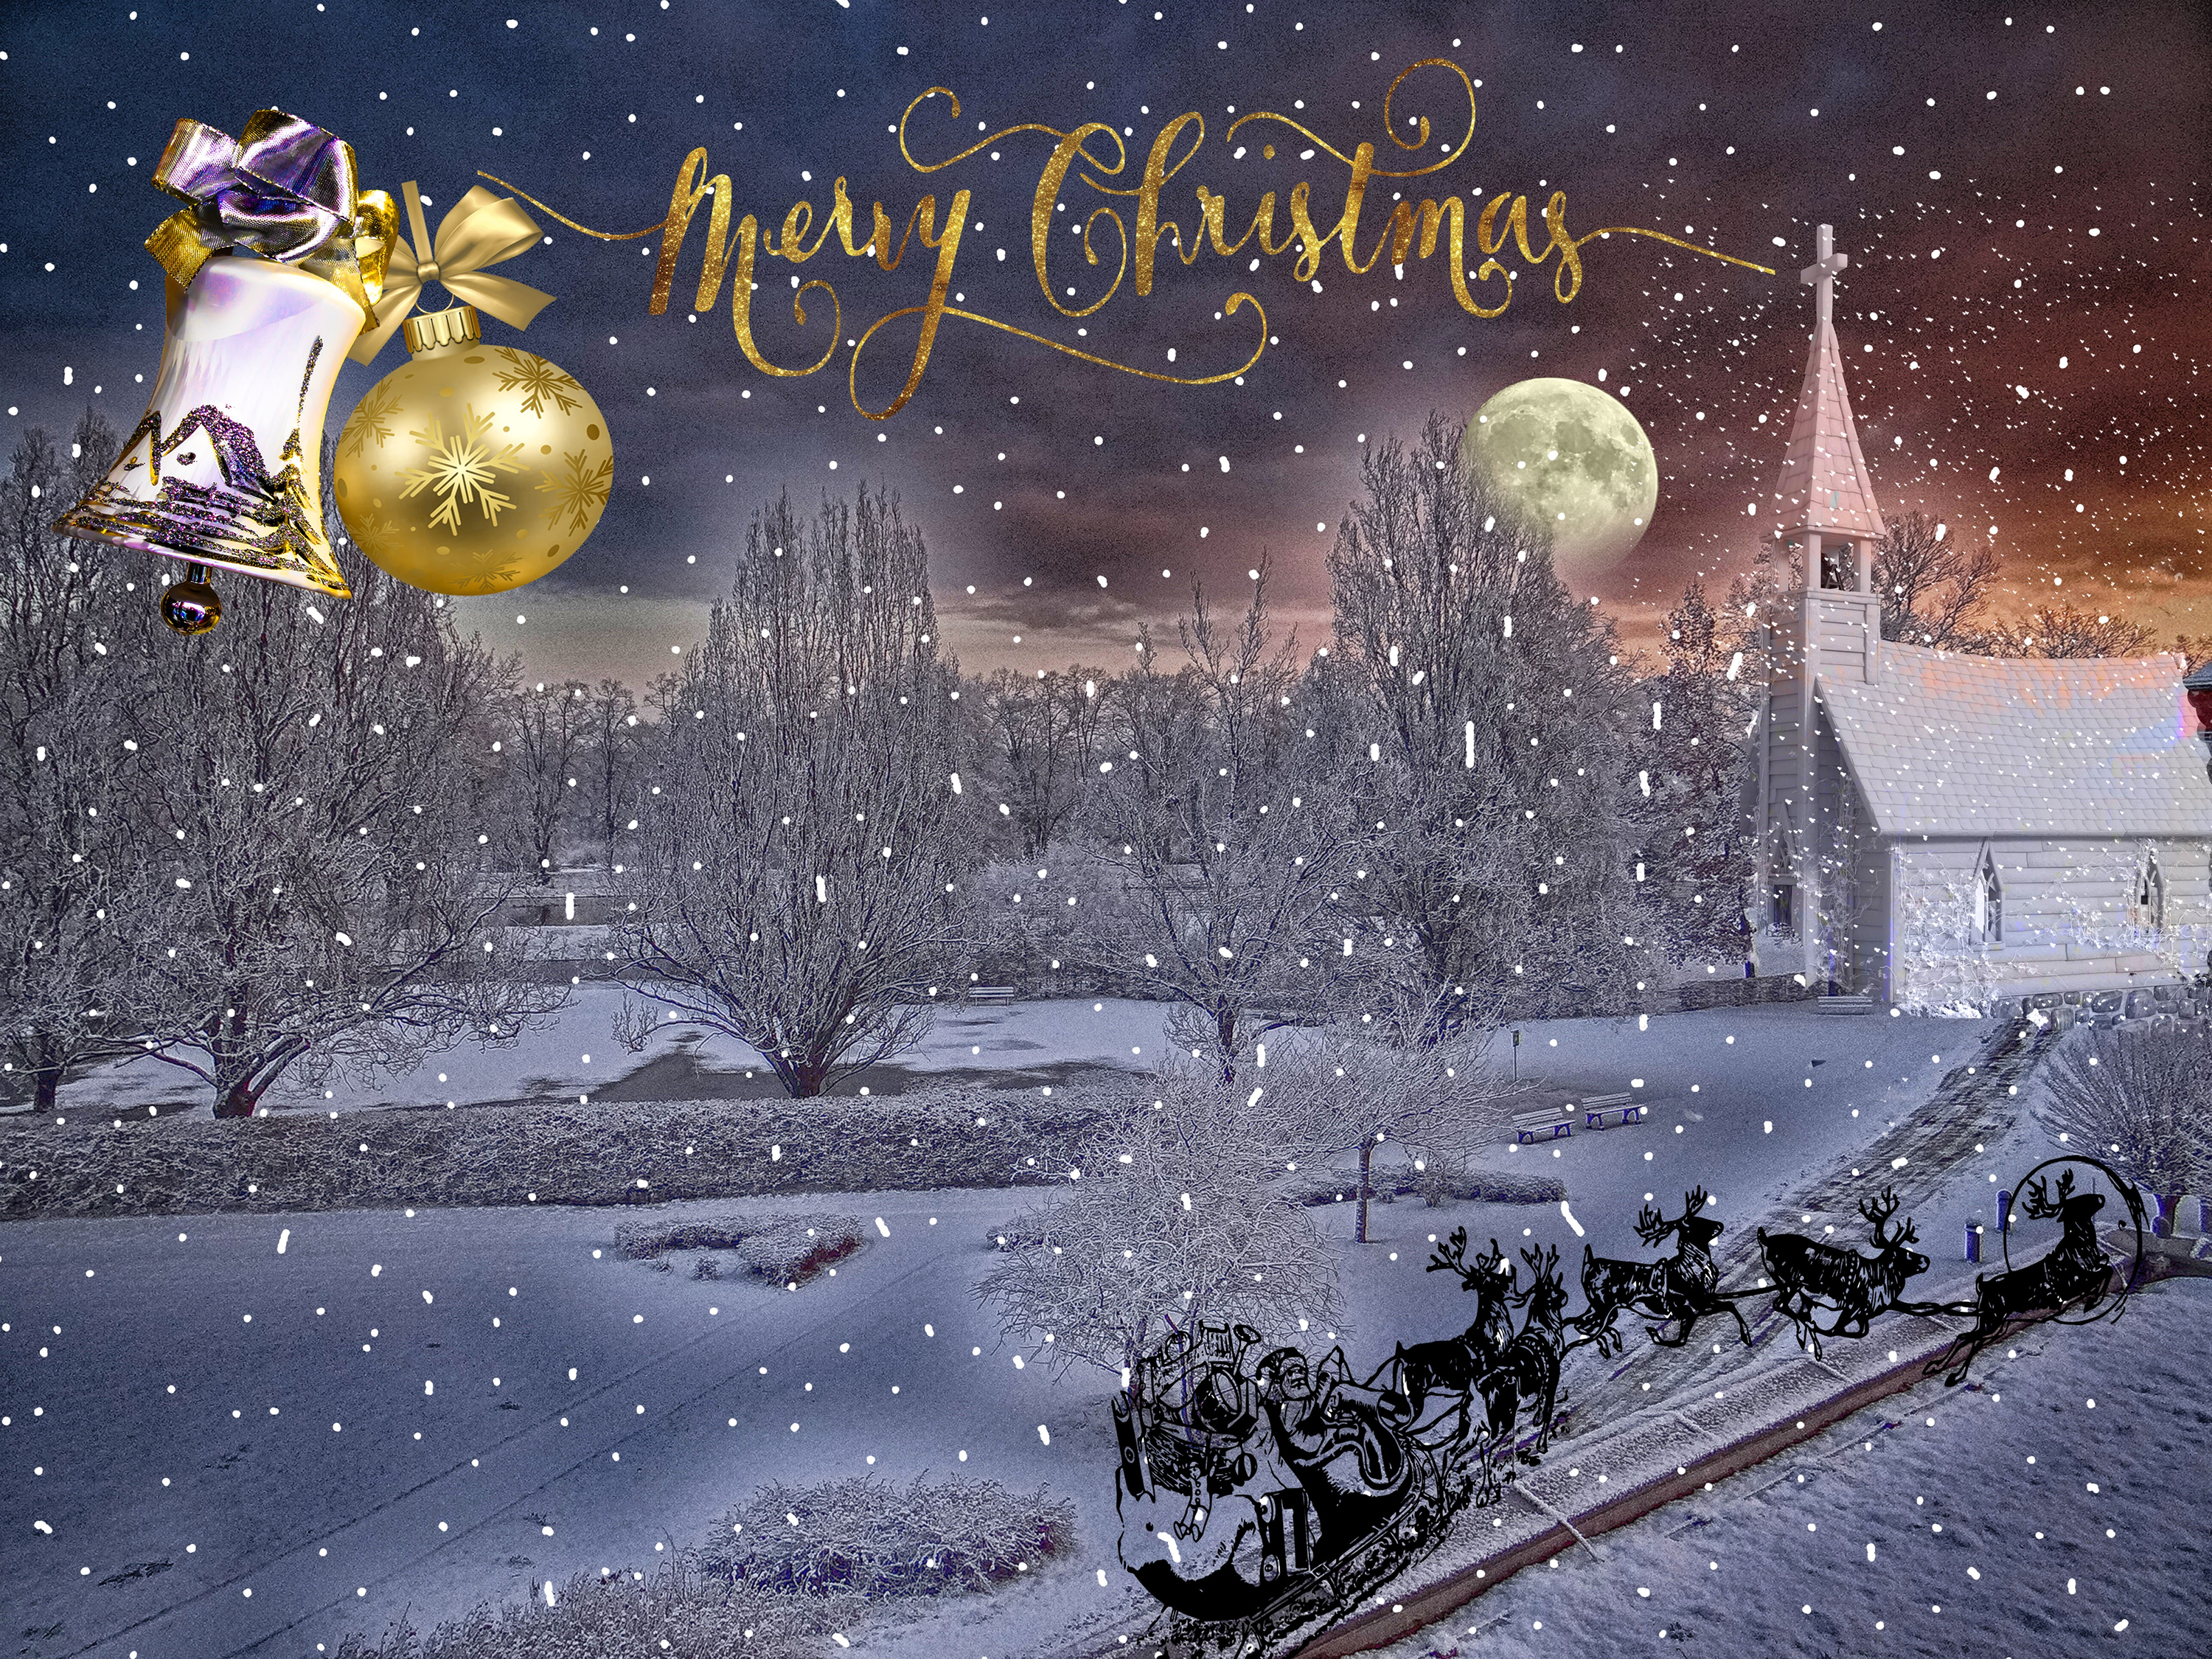 moon, merry christmas, holiday, christmas, bauble, bell, church, reindeer, sled, snow, winter cellphone